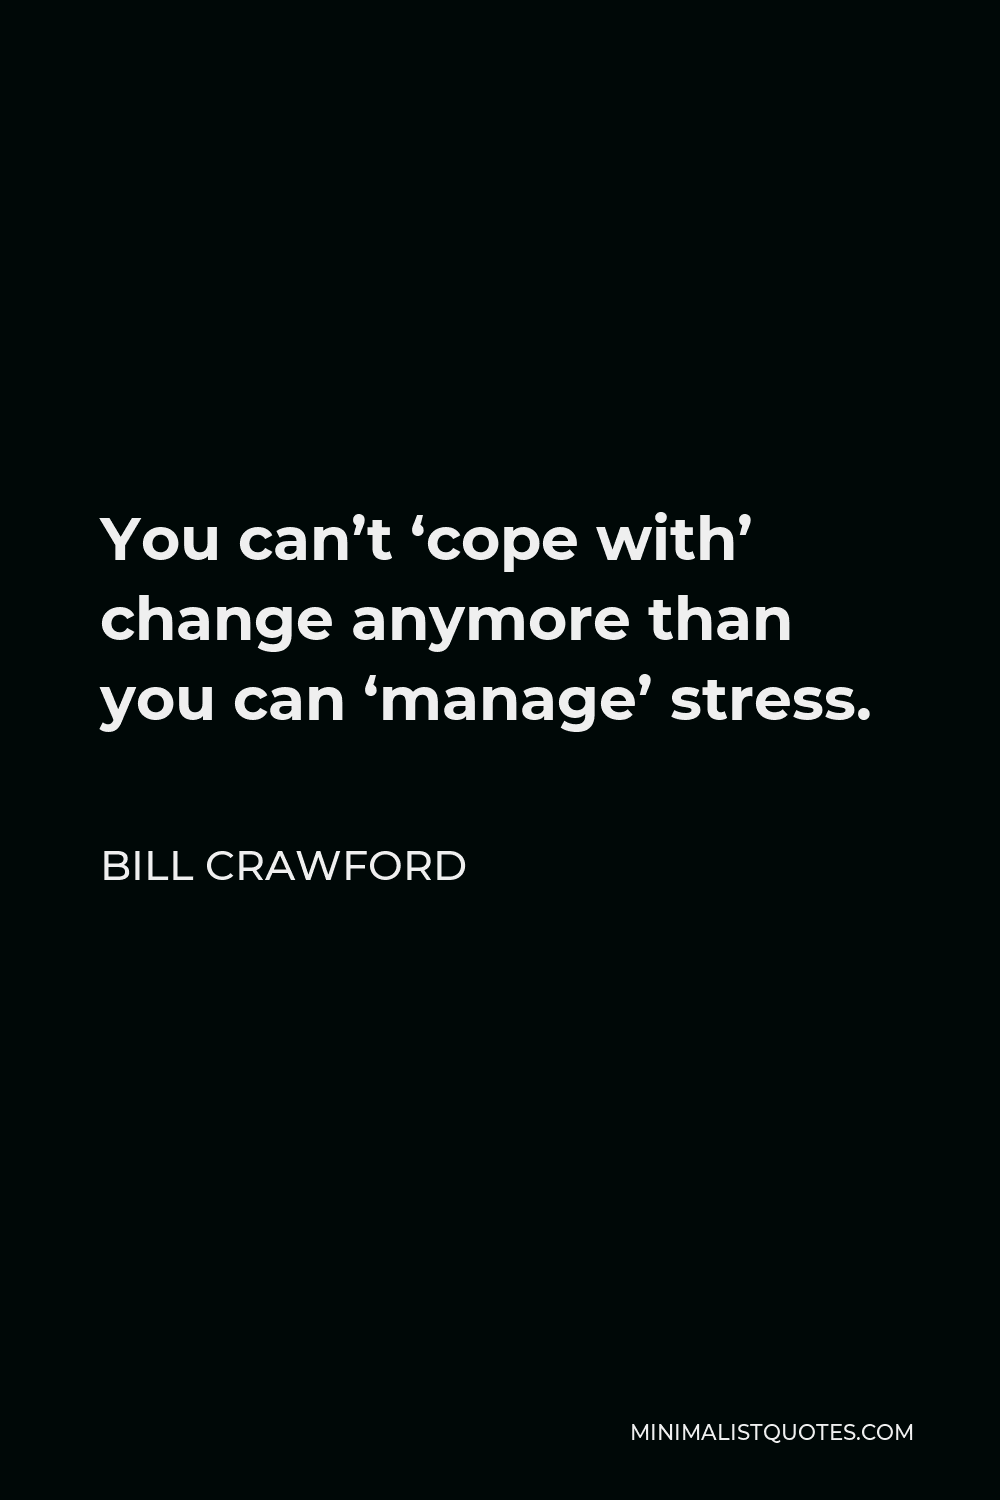 Bill Crawford Quote - You can’t ‘cope with’ change anymore than you can ‘manage’ stress.